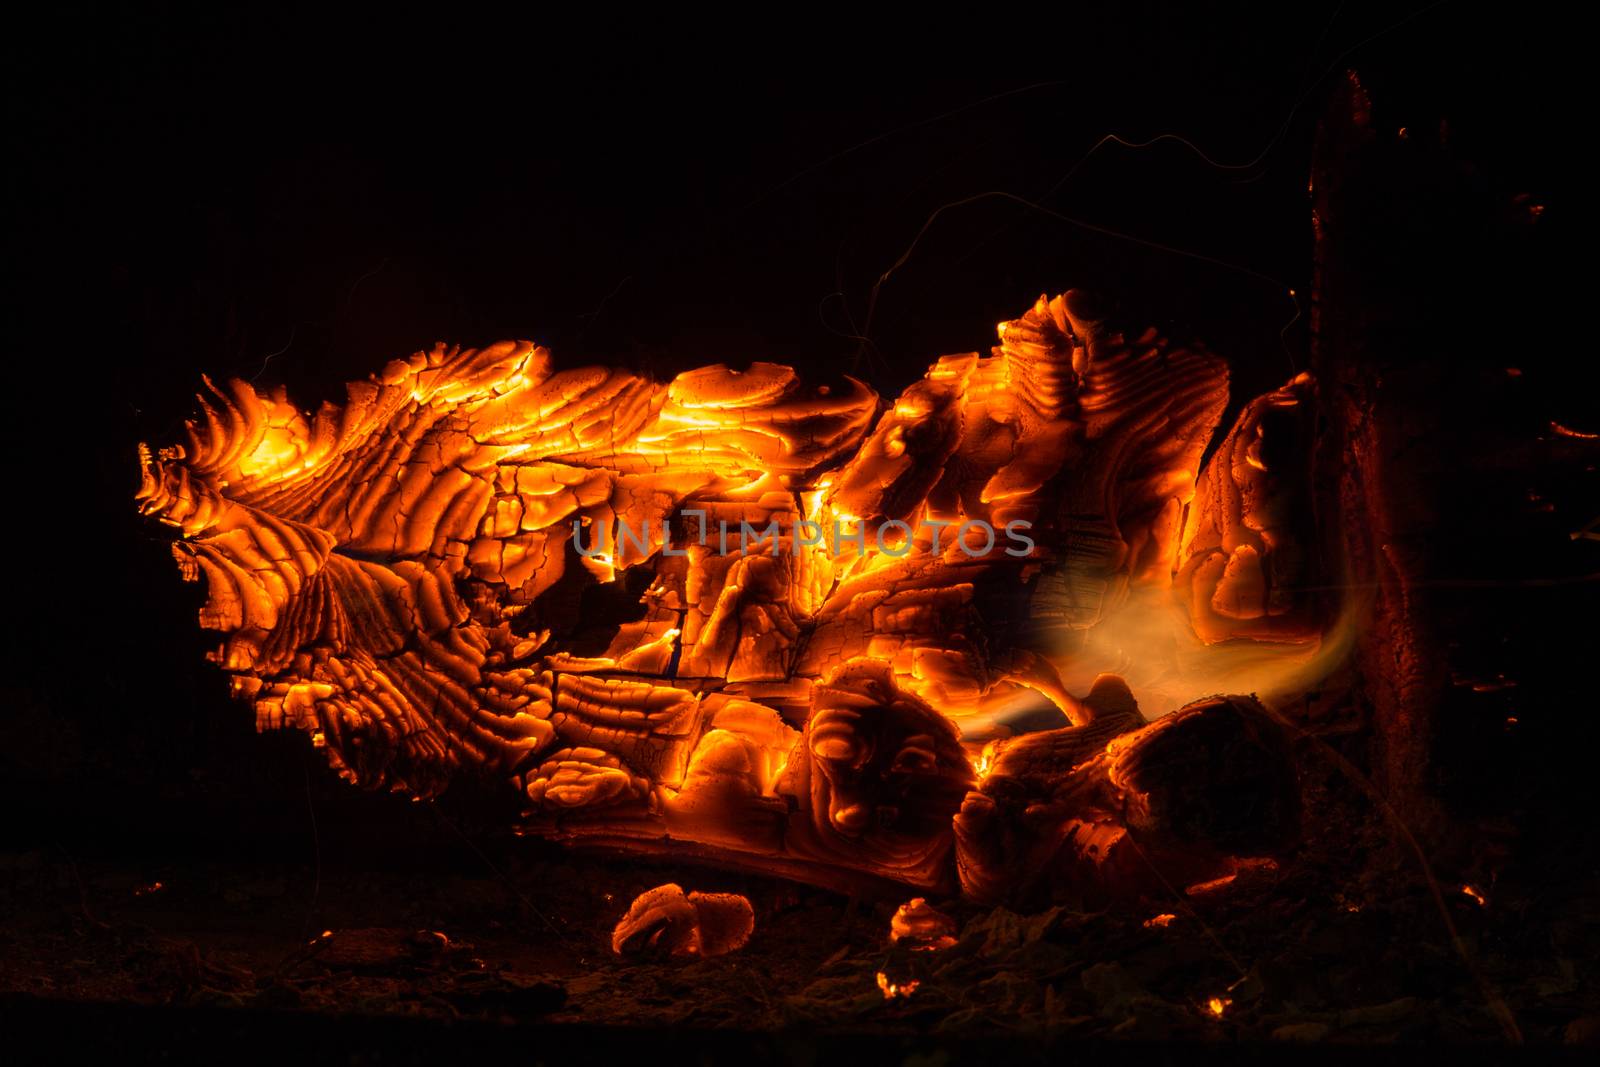 View of the fireplace with burning wood by sandra_fotodesign